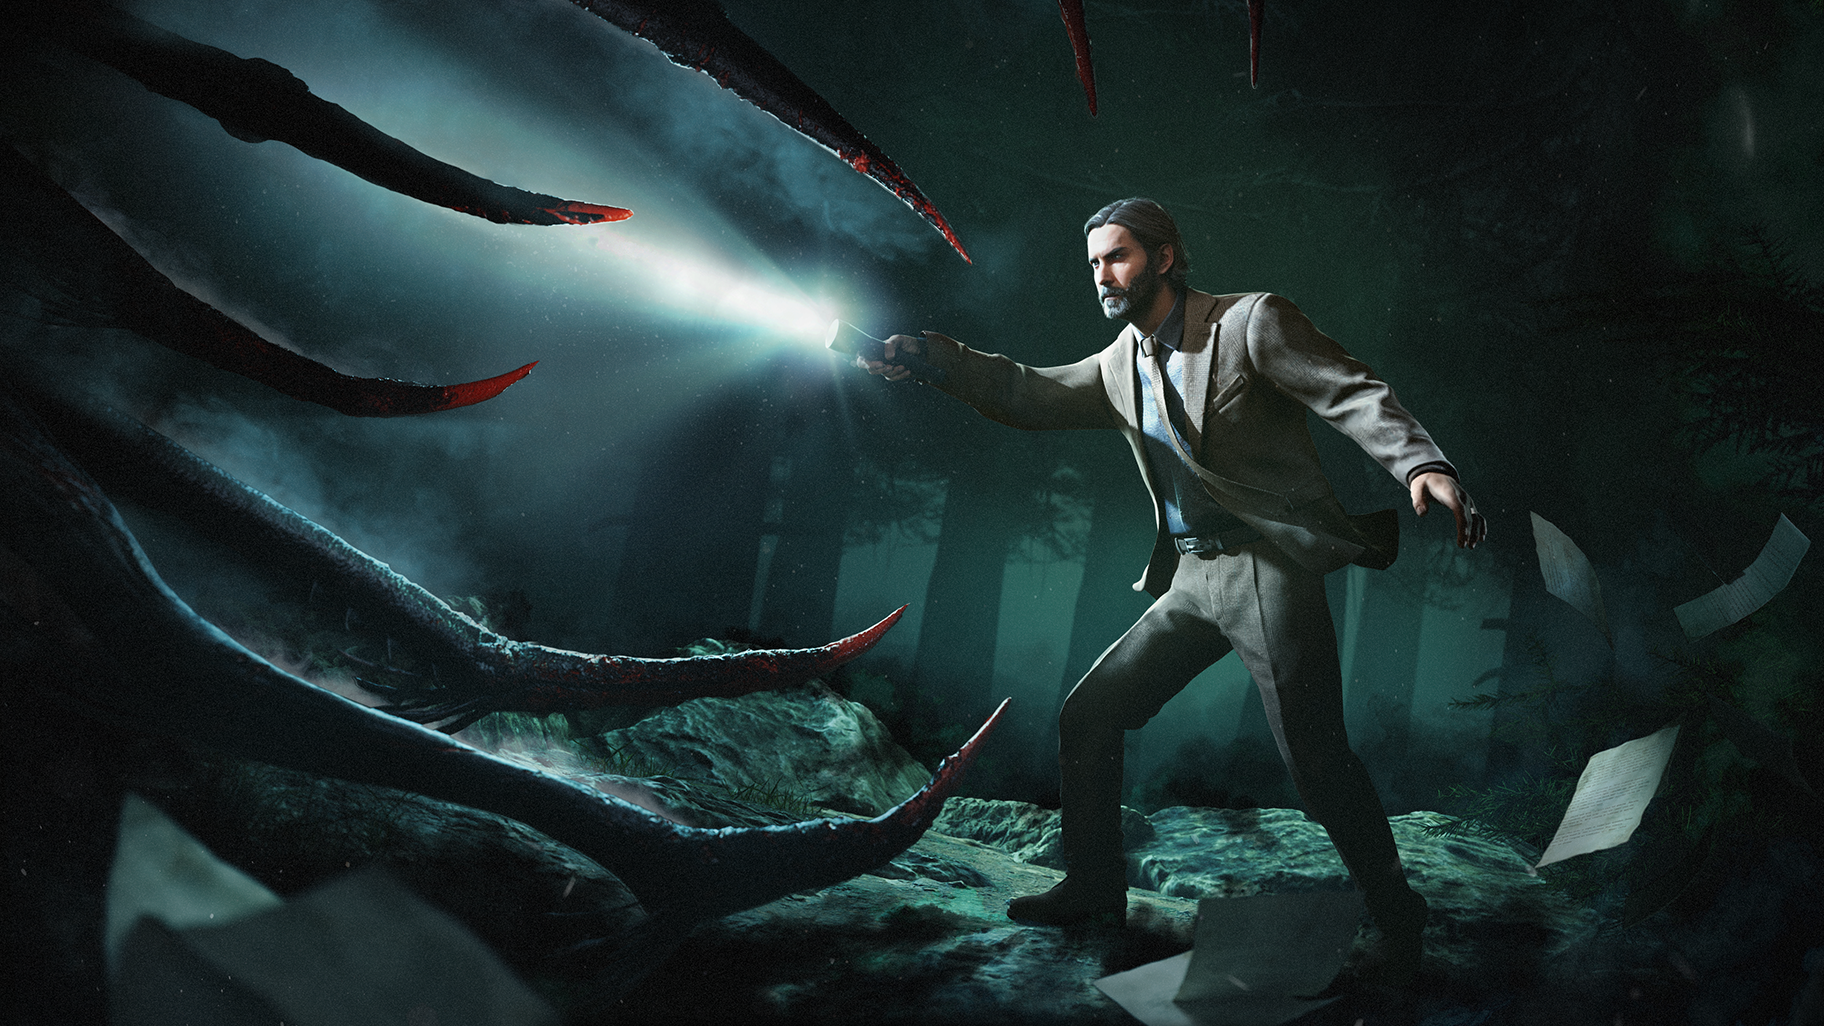 Alan Wake Joining Dead by Daylight This Month